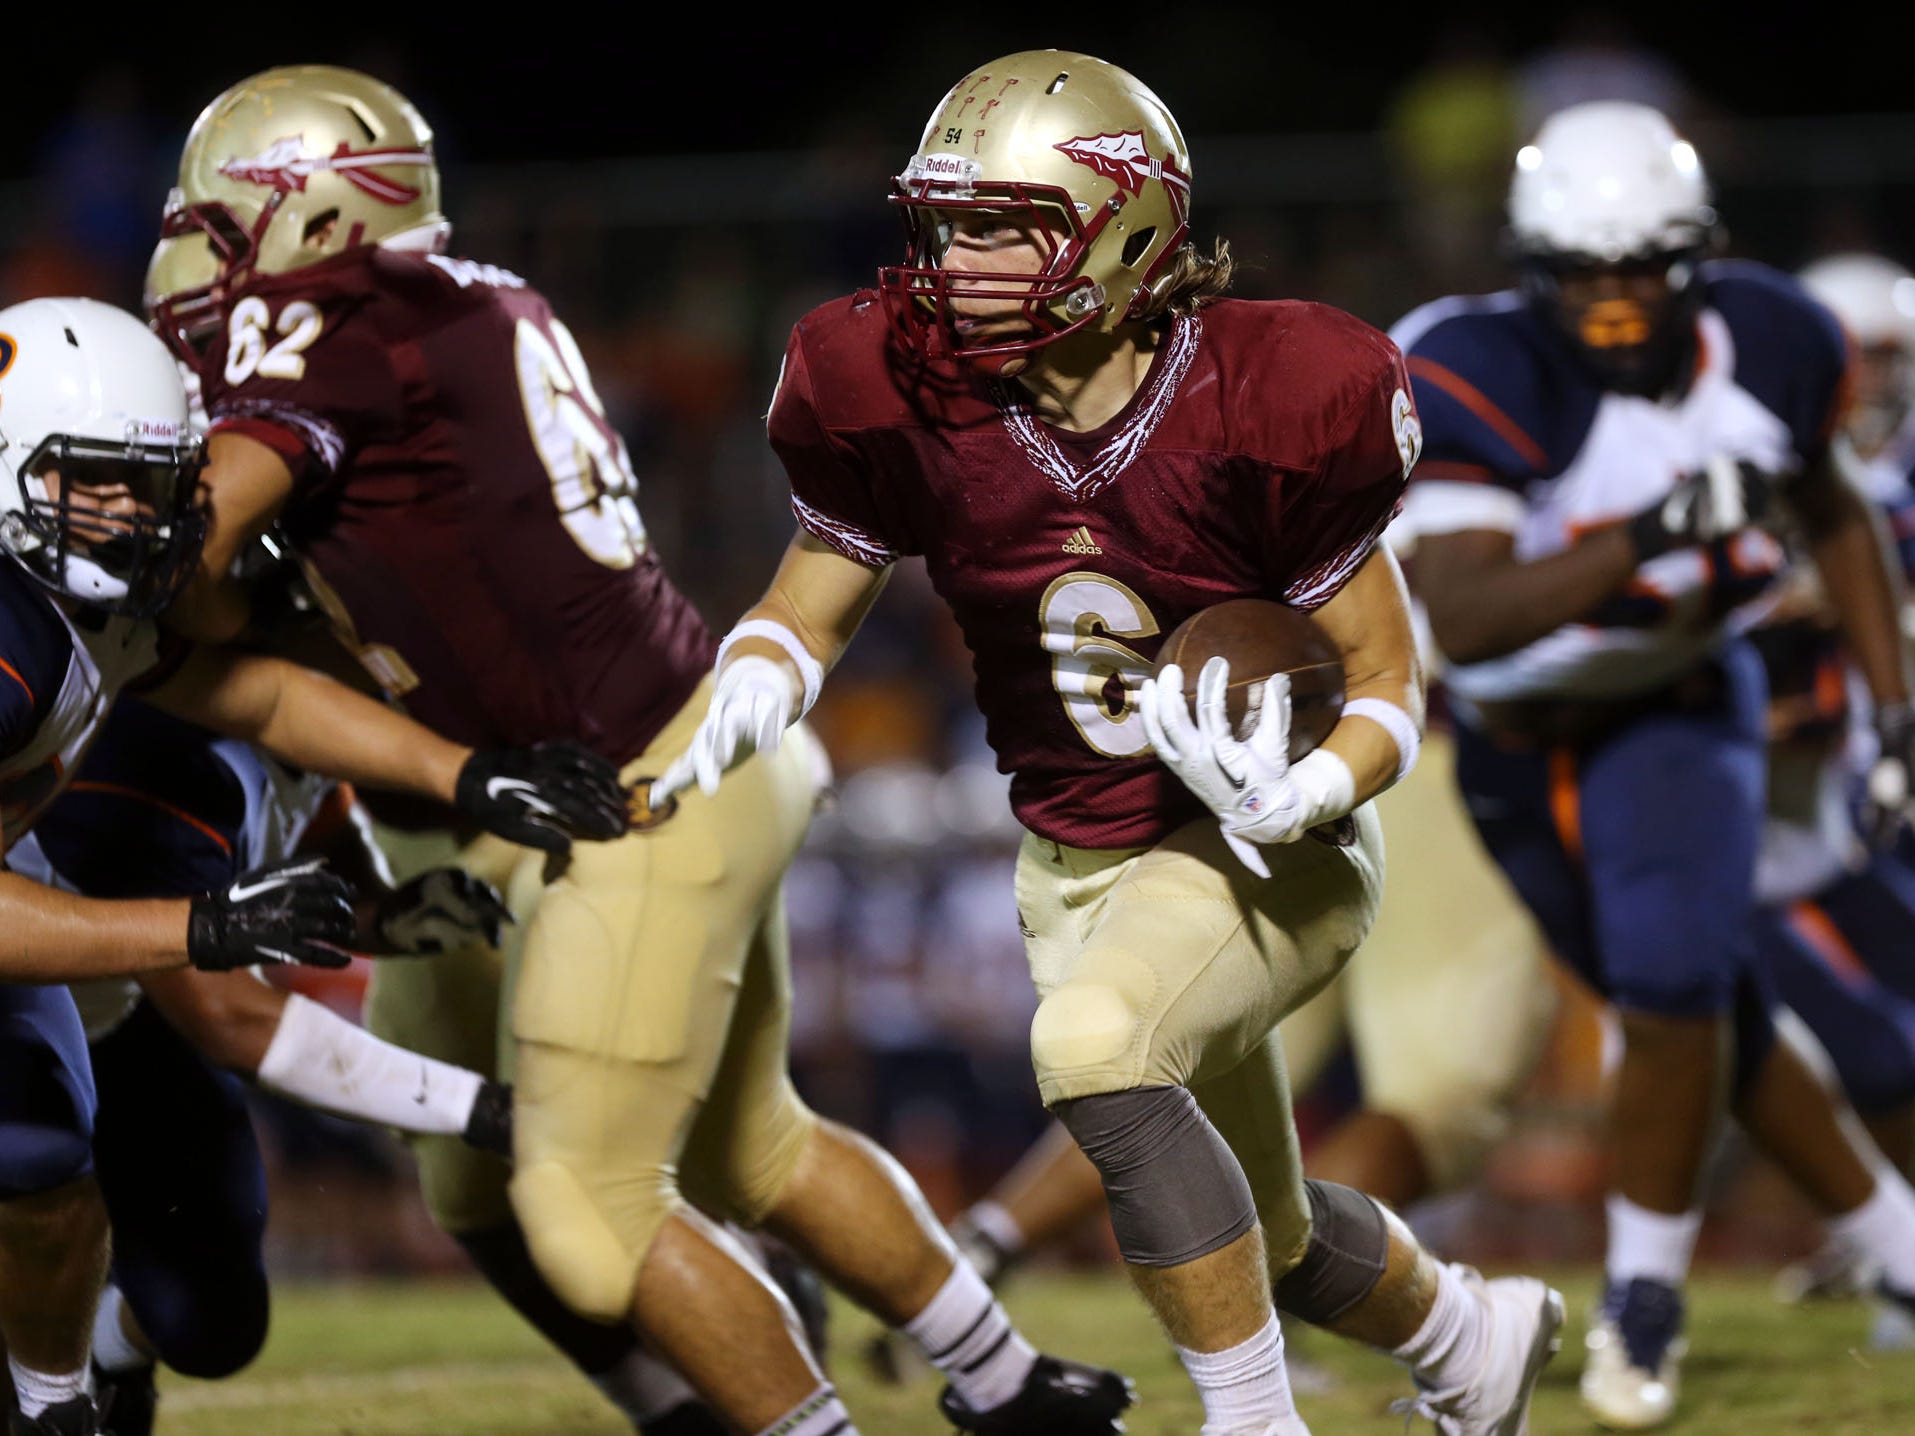 Riverdale and running back Austin Bryant have lost just once this season - to Blackman.